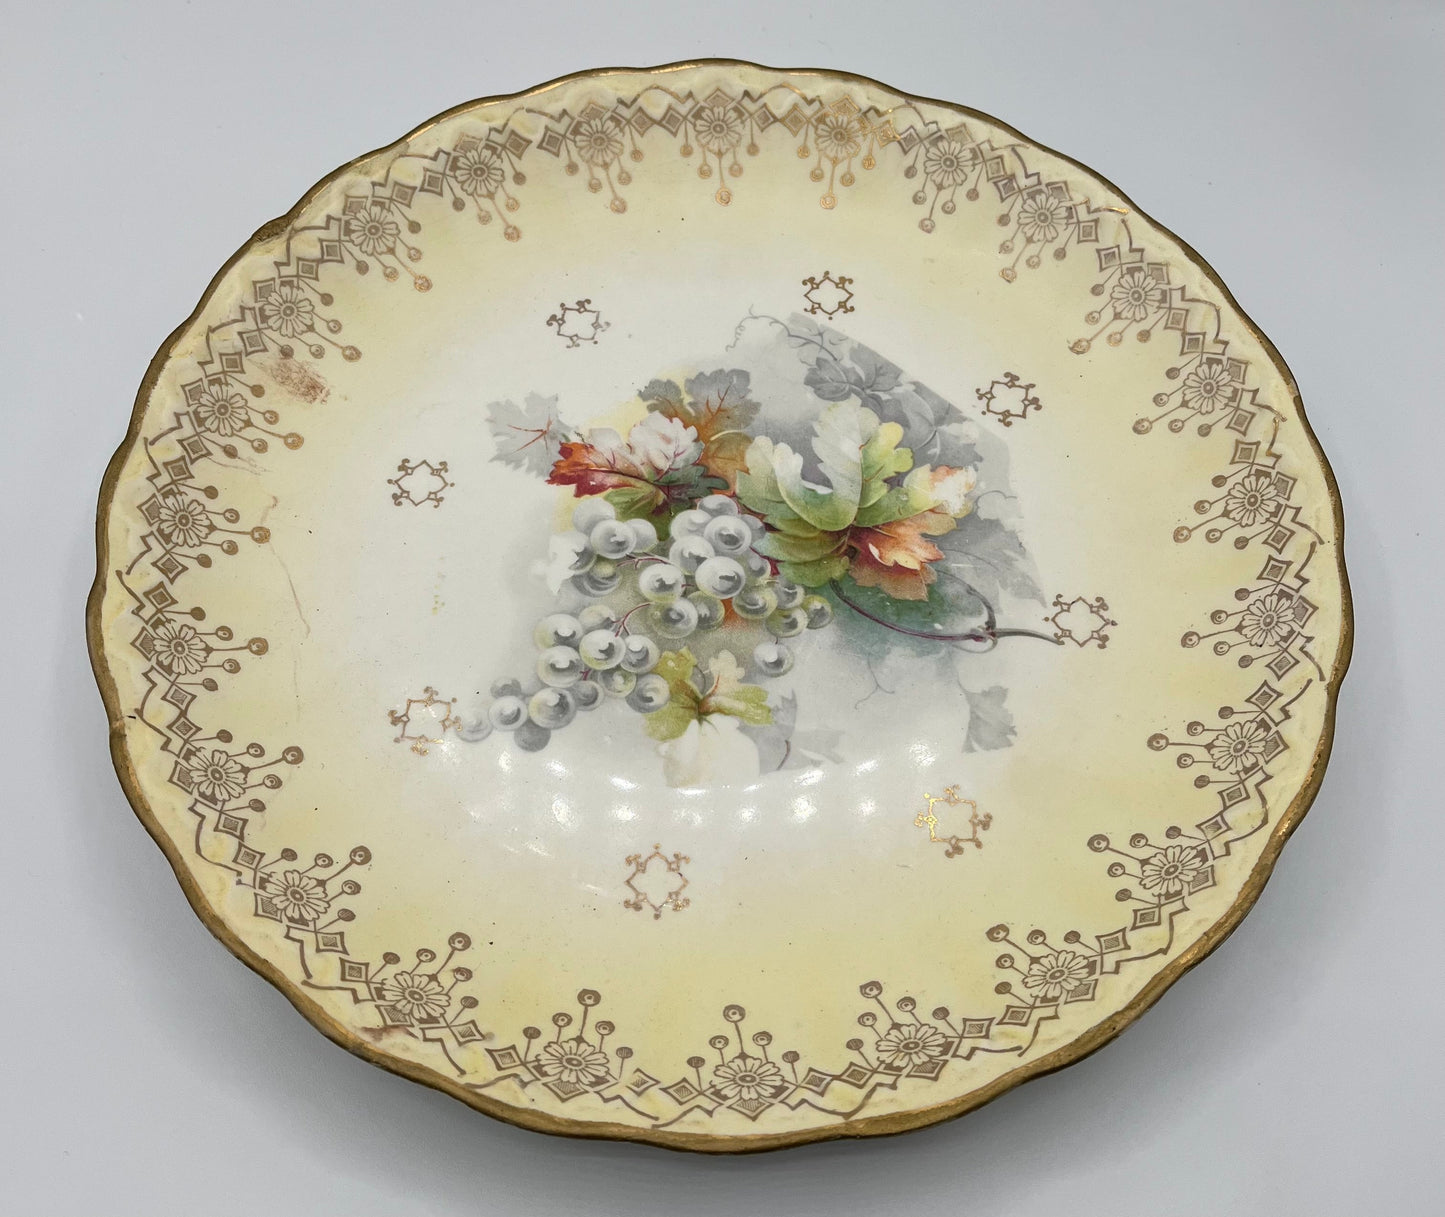 Antique Serving Plate and Bowl (set of 2)